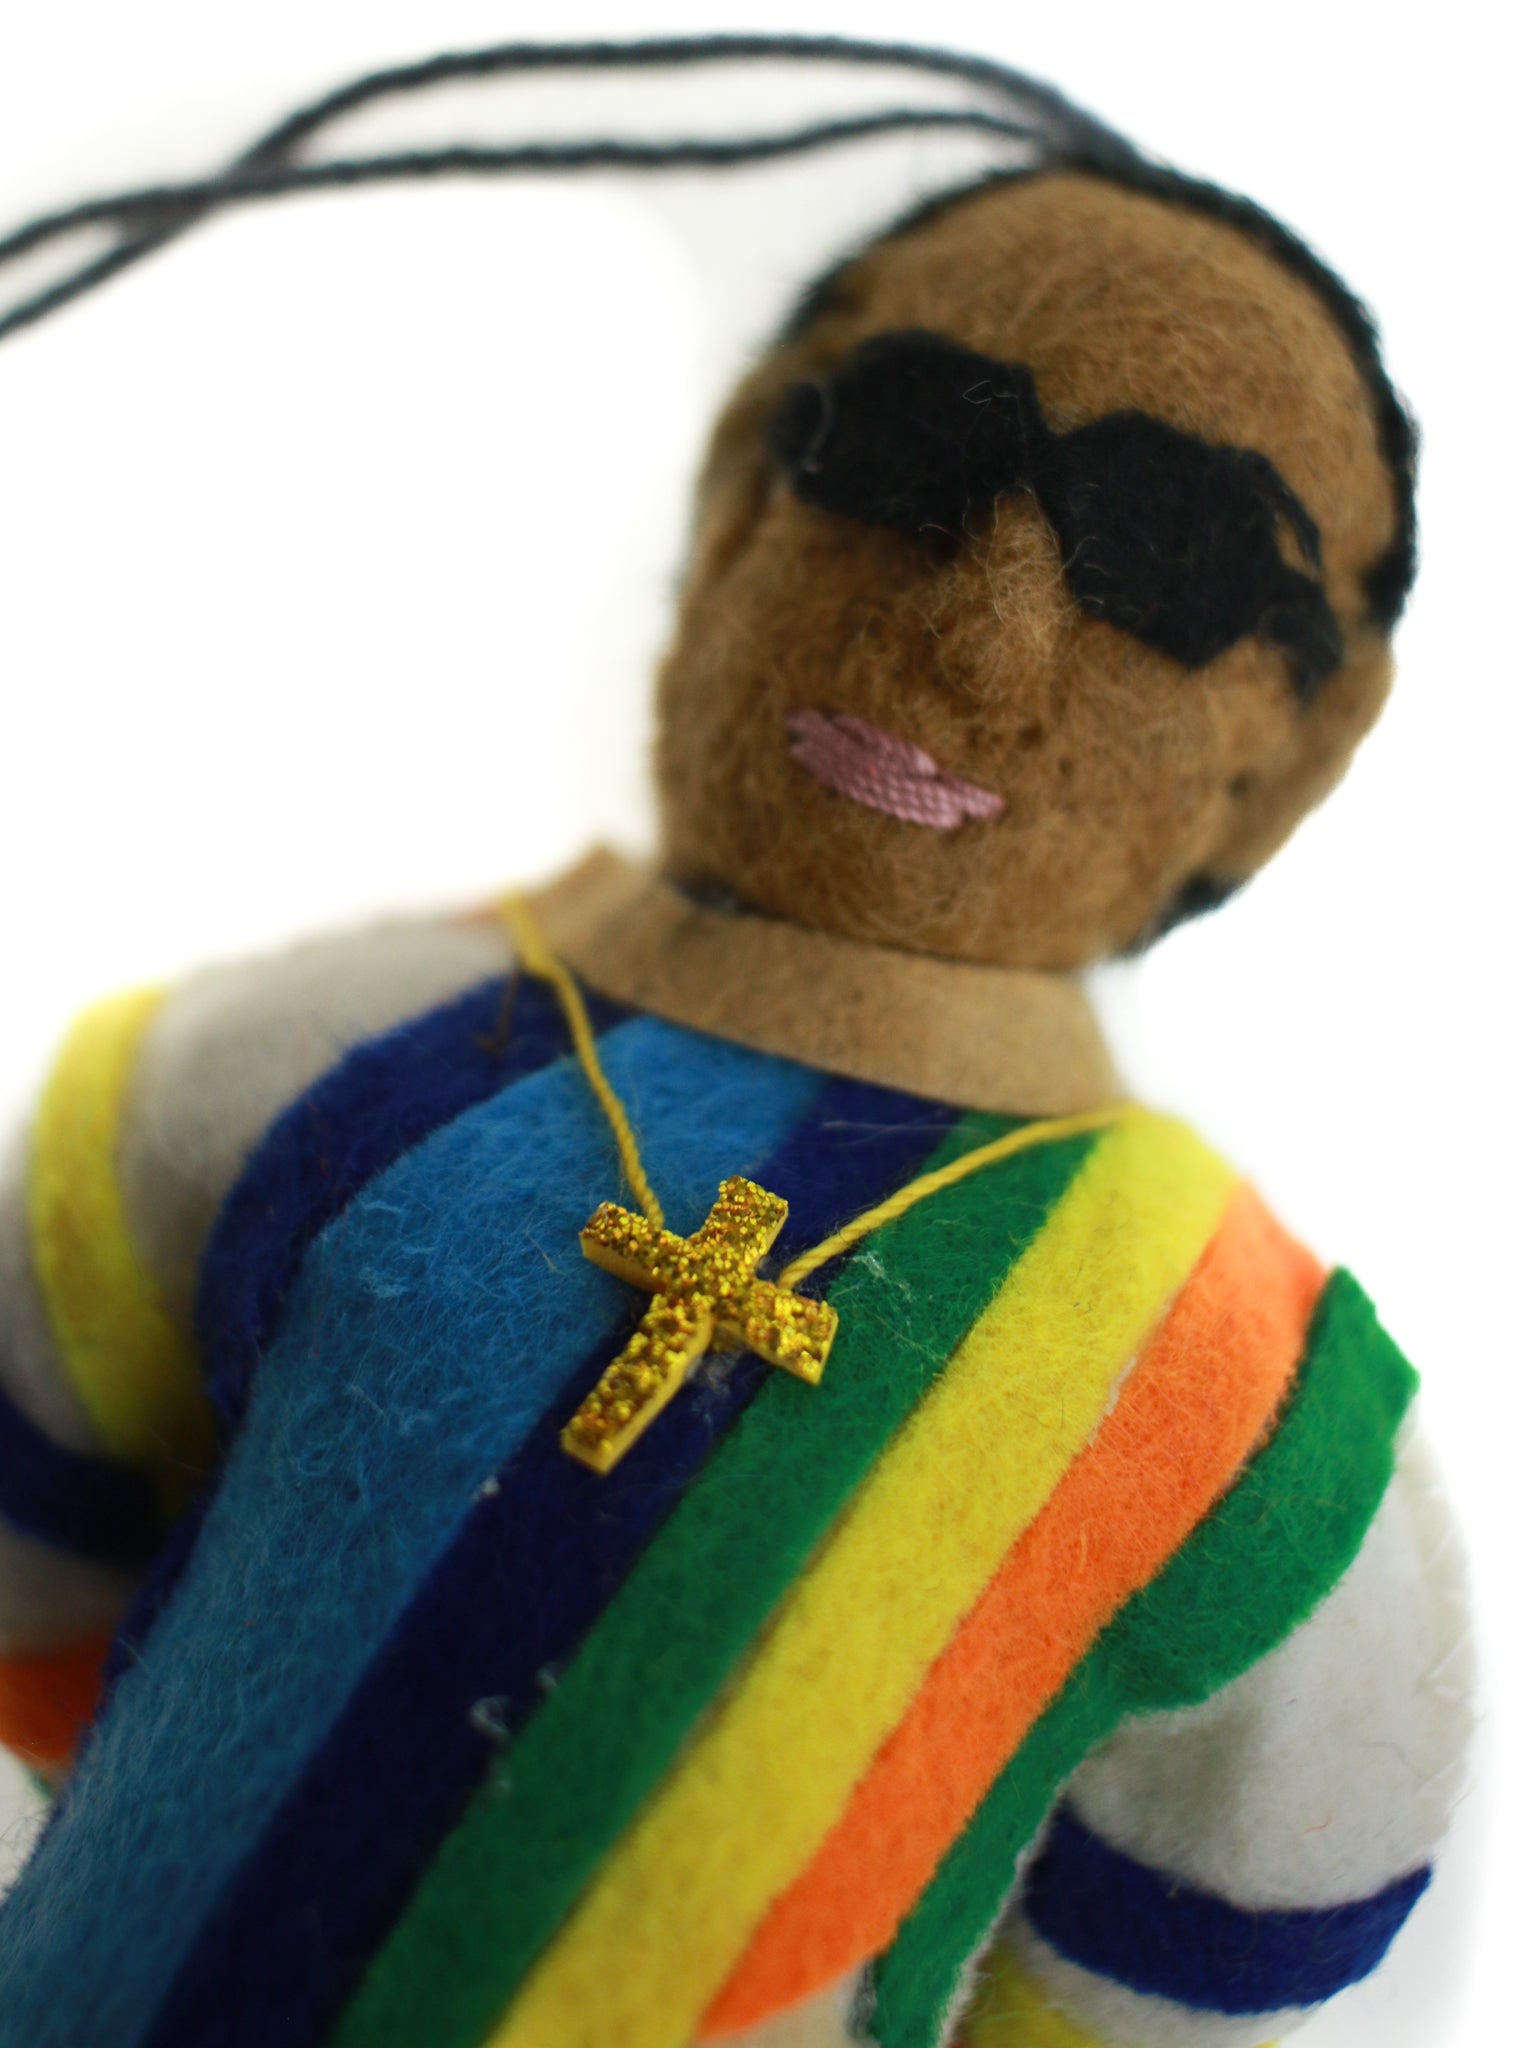 The Notorious B.I.G. Ornament